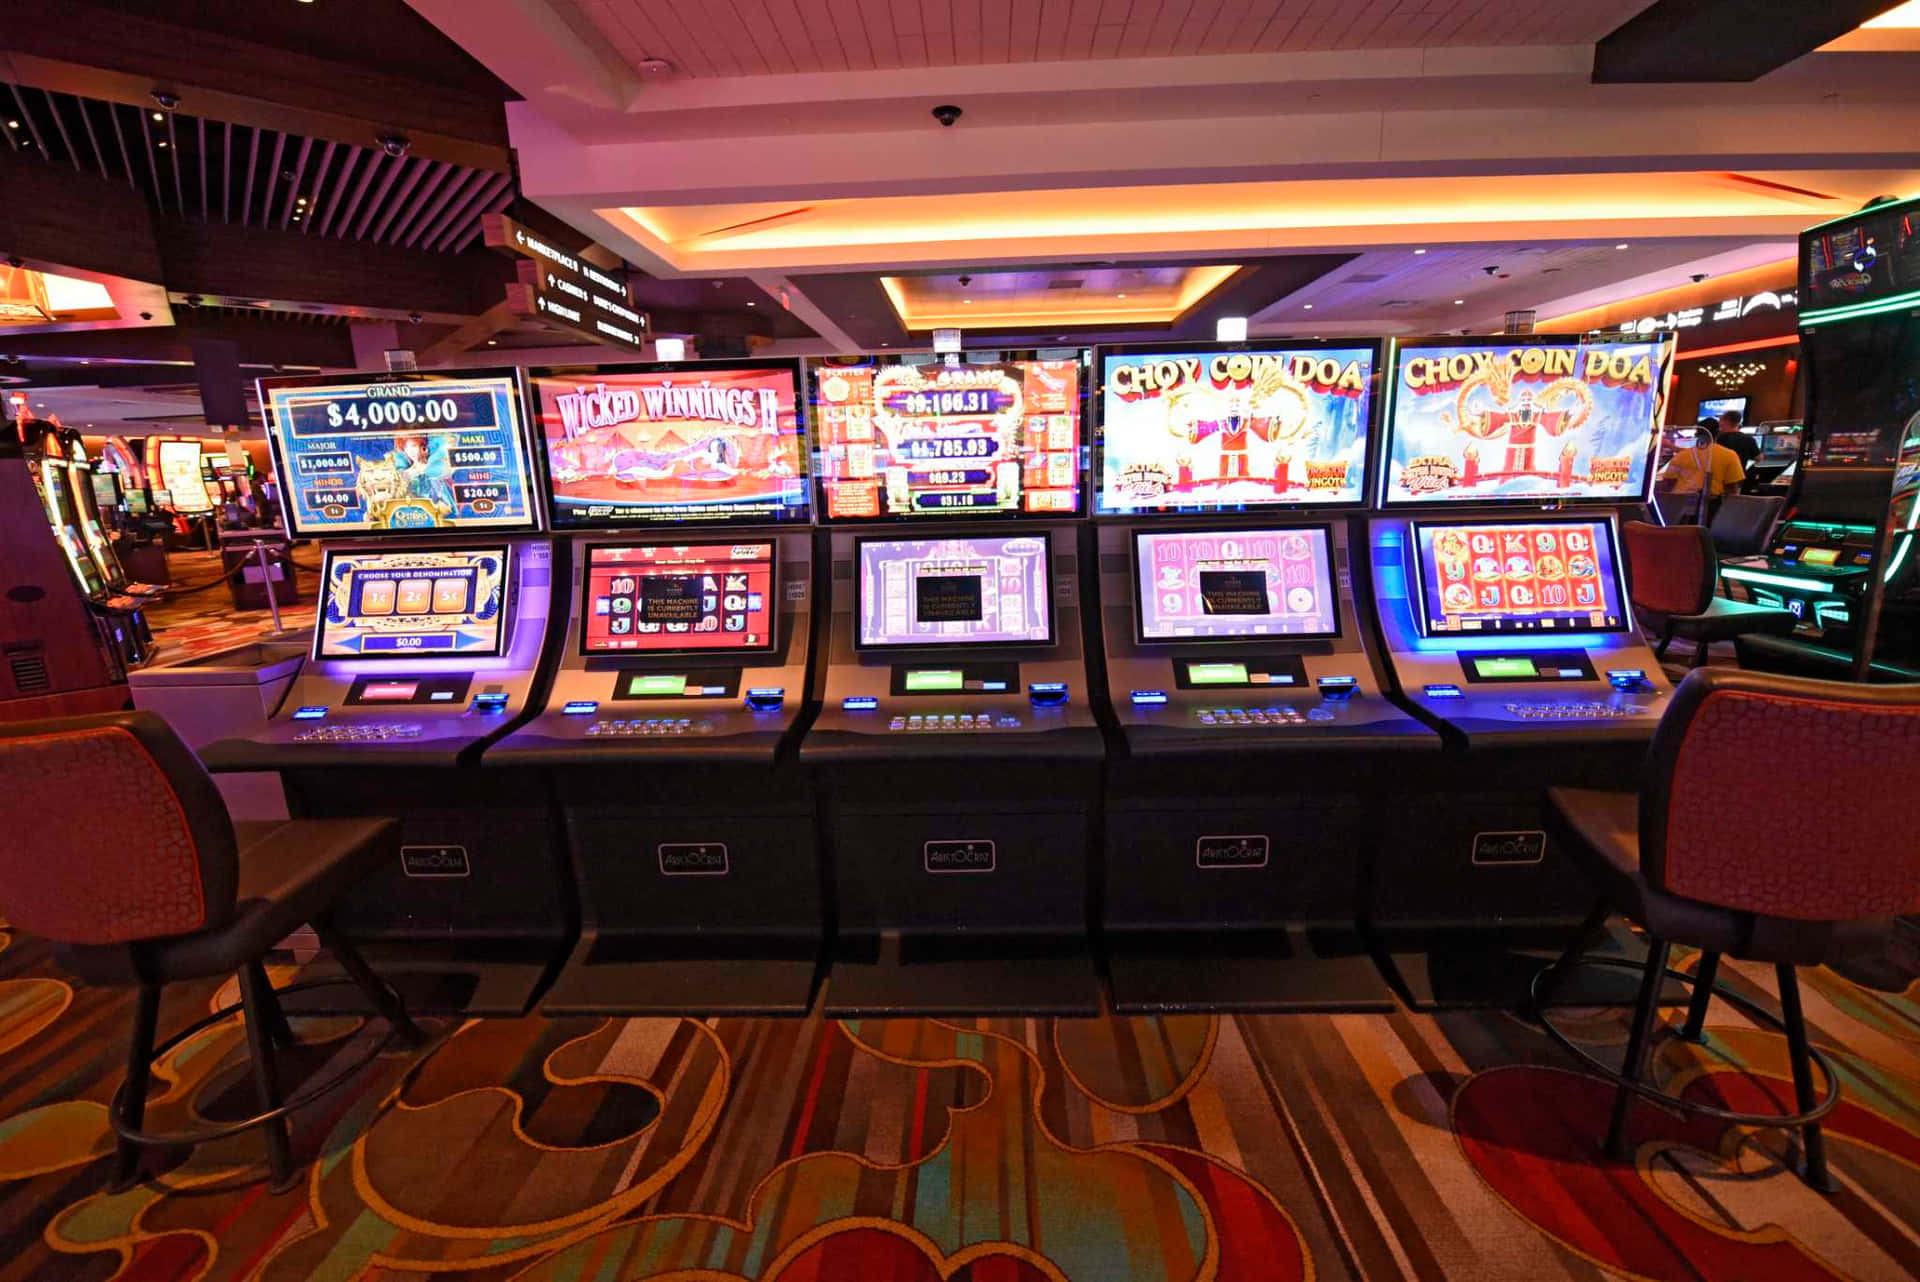 Exciting and Vibrant Slot Machines